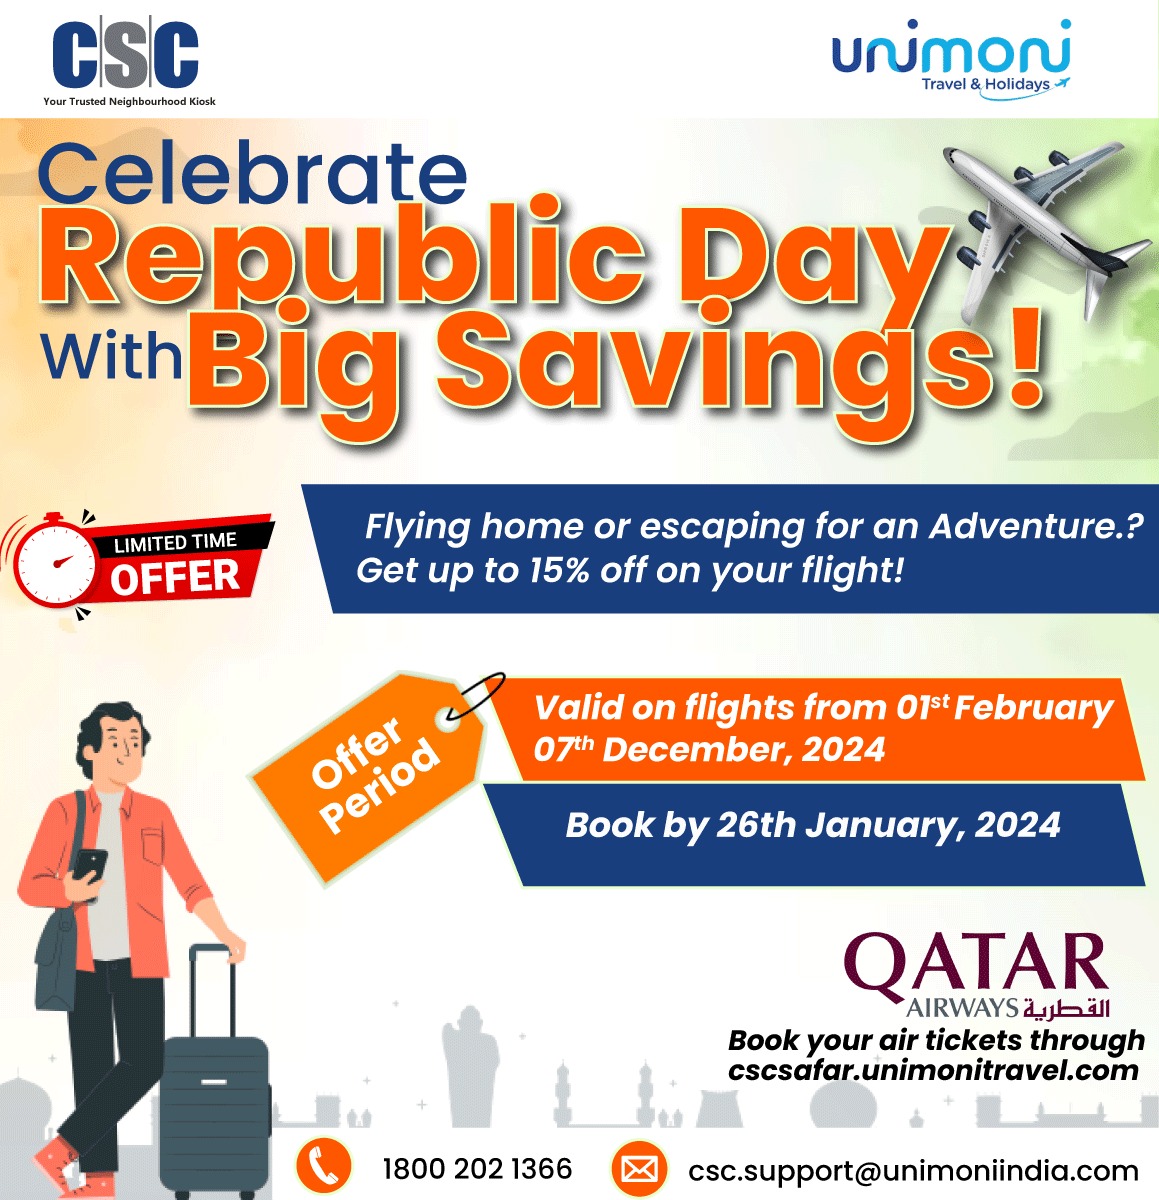 Celebrate Republic Day with Big Savings! Get up to 15% off on flight tickets... Limited Period Offer, Book tickets by 26th January, 2024. Book your air tickets through cscsafar.unimonitravel.com For any queries, call us on 1800 202 1366 or mail us on csc.support@unimoniindia.com